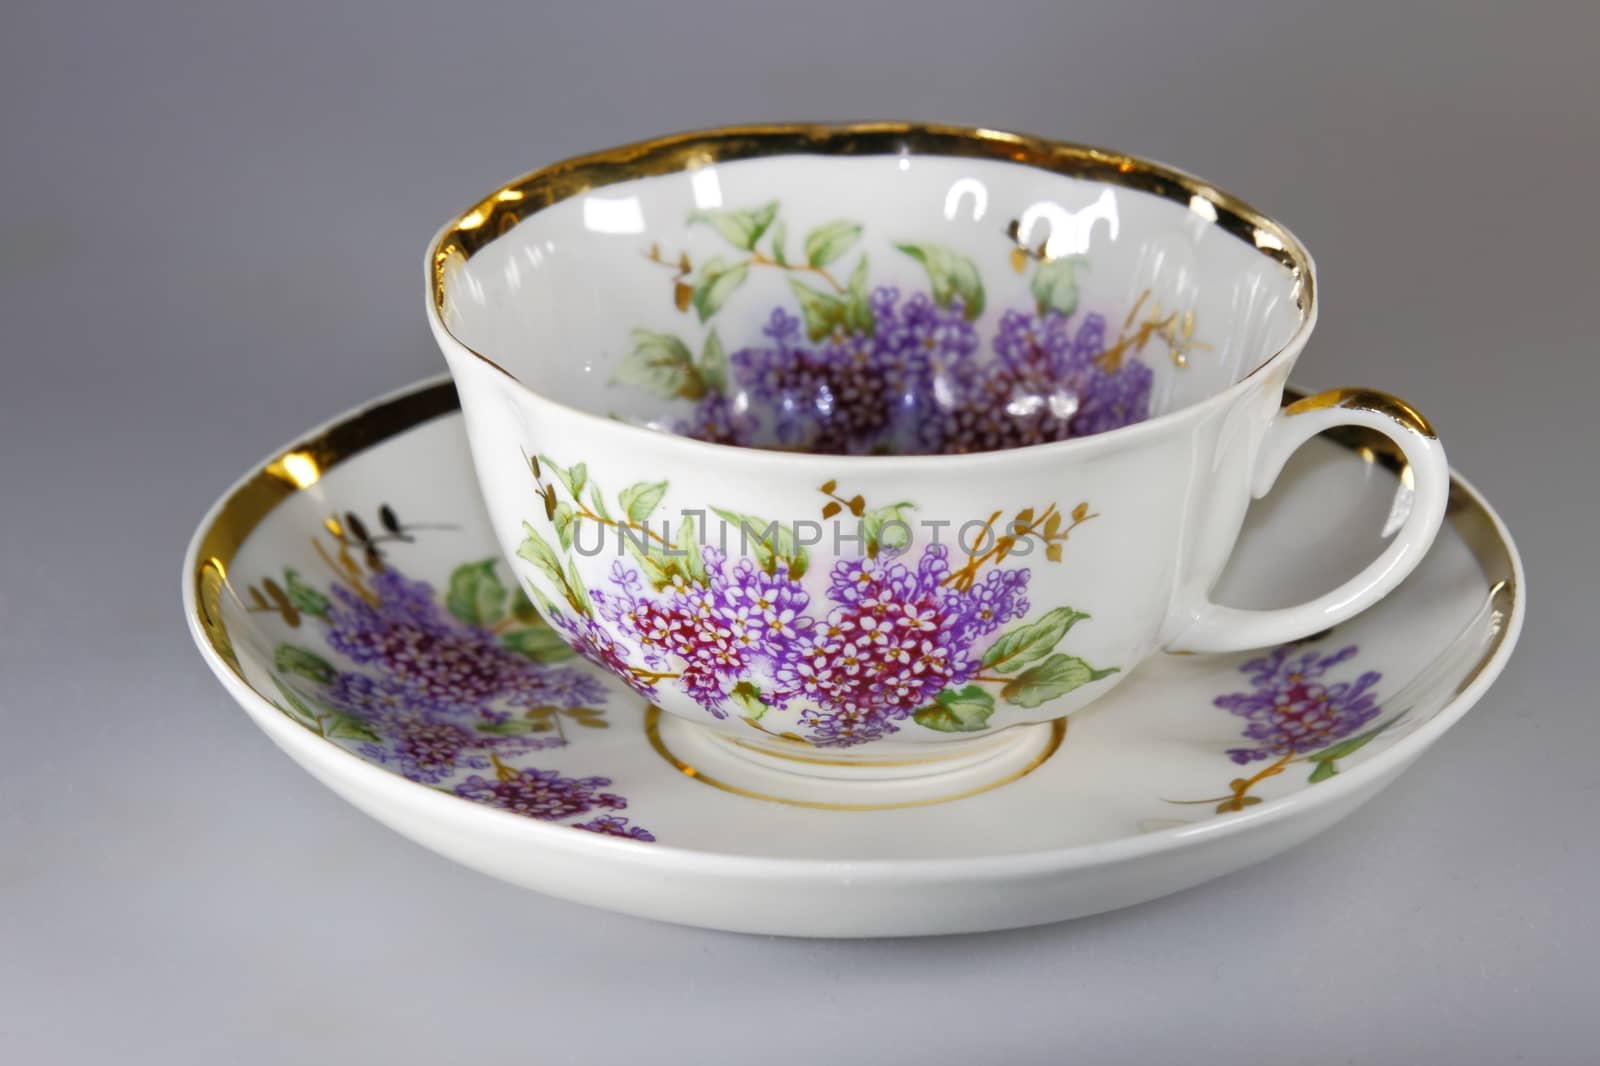 to drink tea and coffee with a beautiful set of tableware